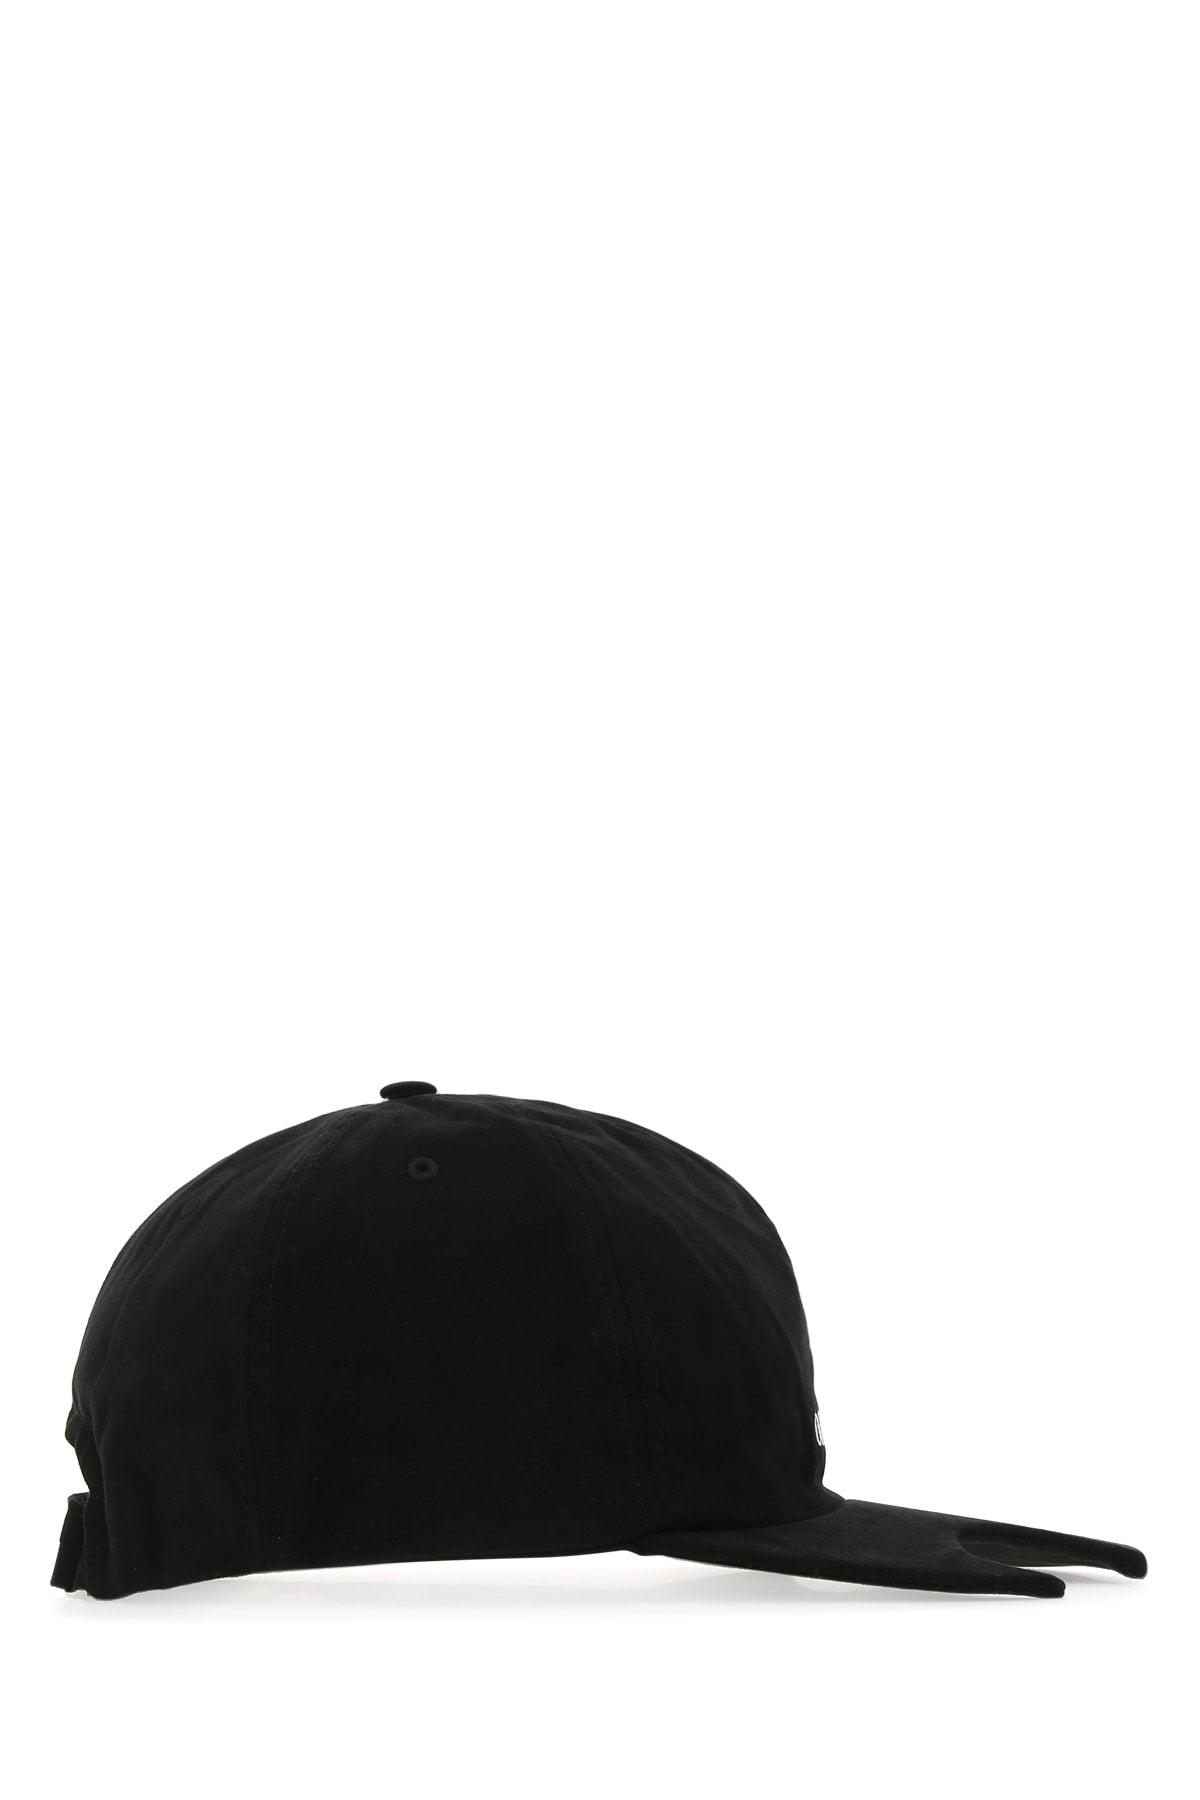 Off-White c/o Virgil Abloh Cotton Embroidered Logo Baseball Cap in 